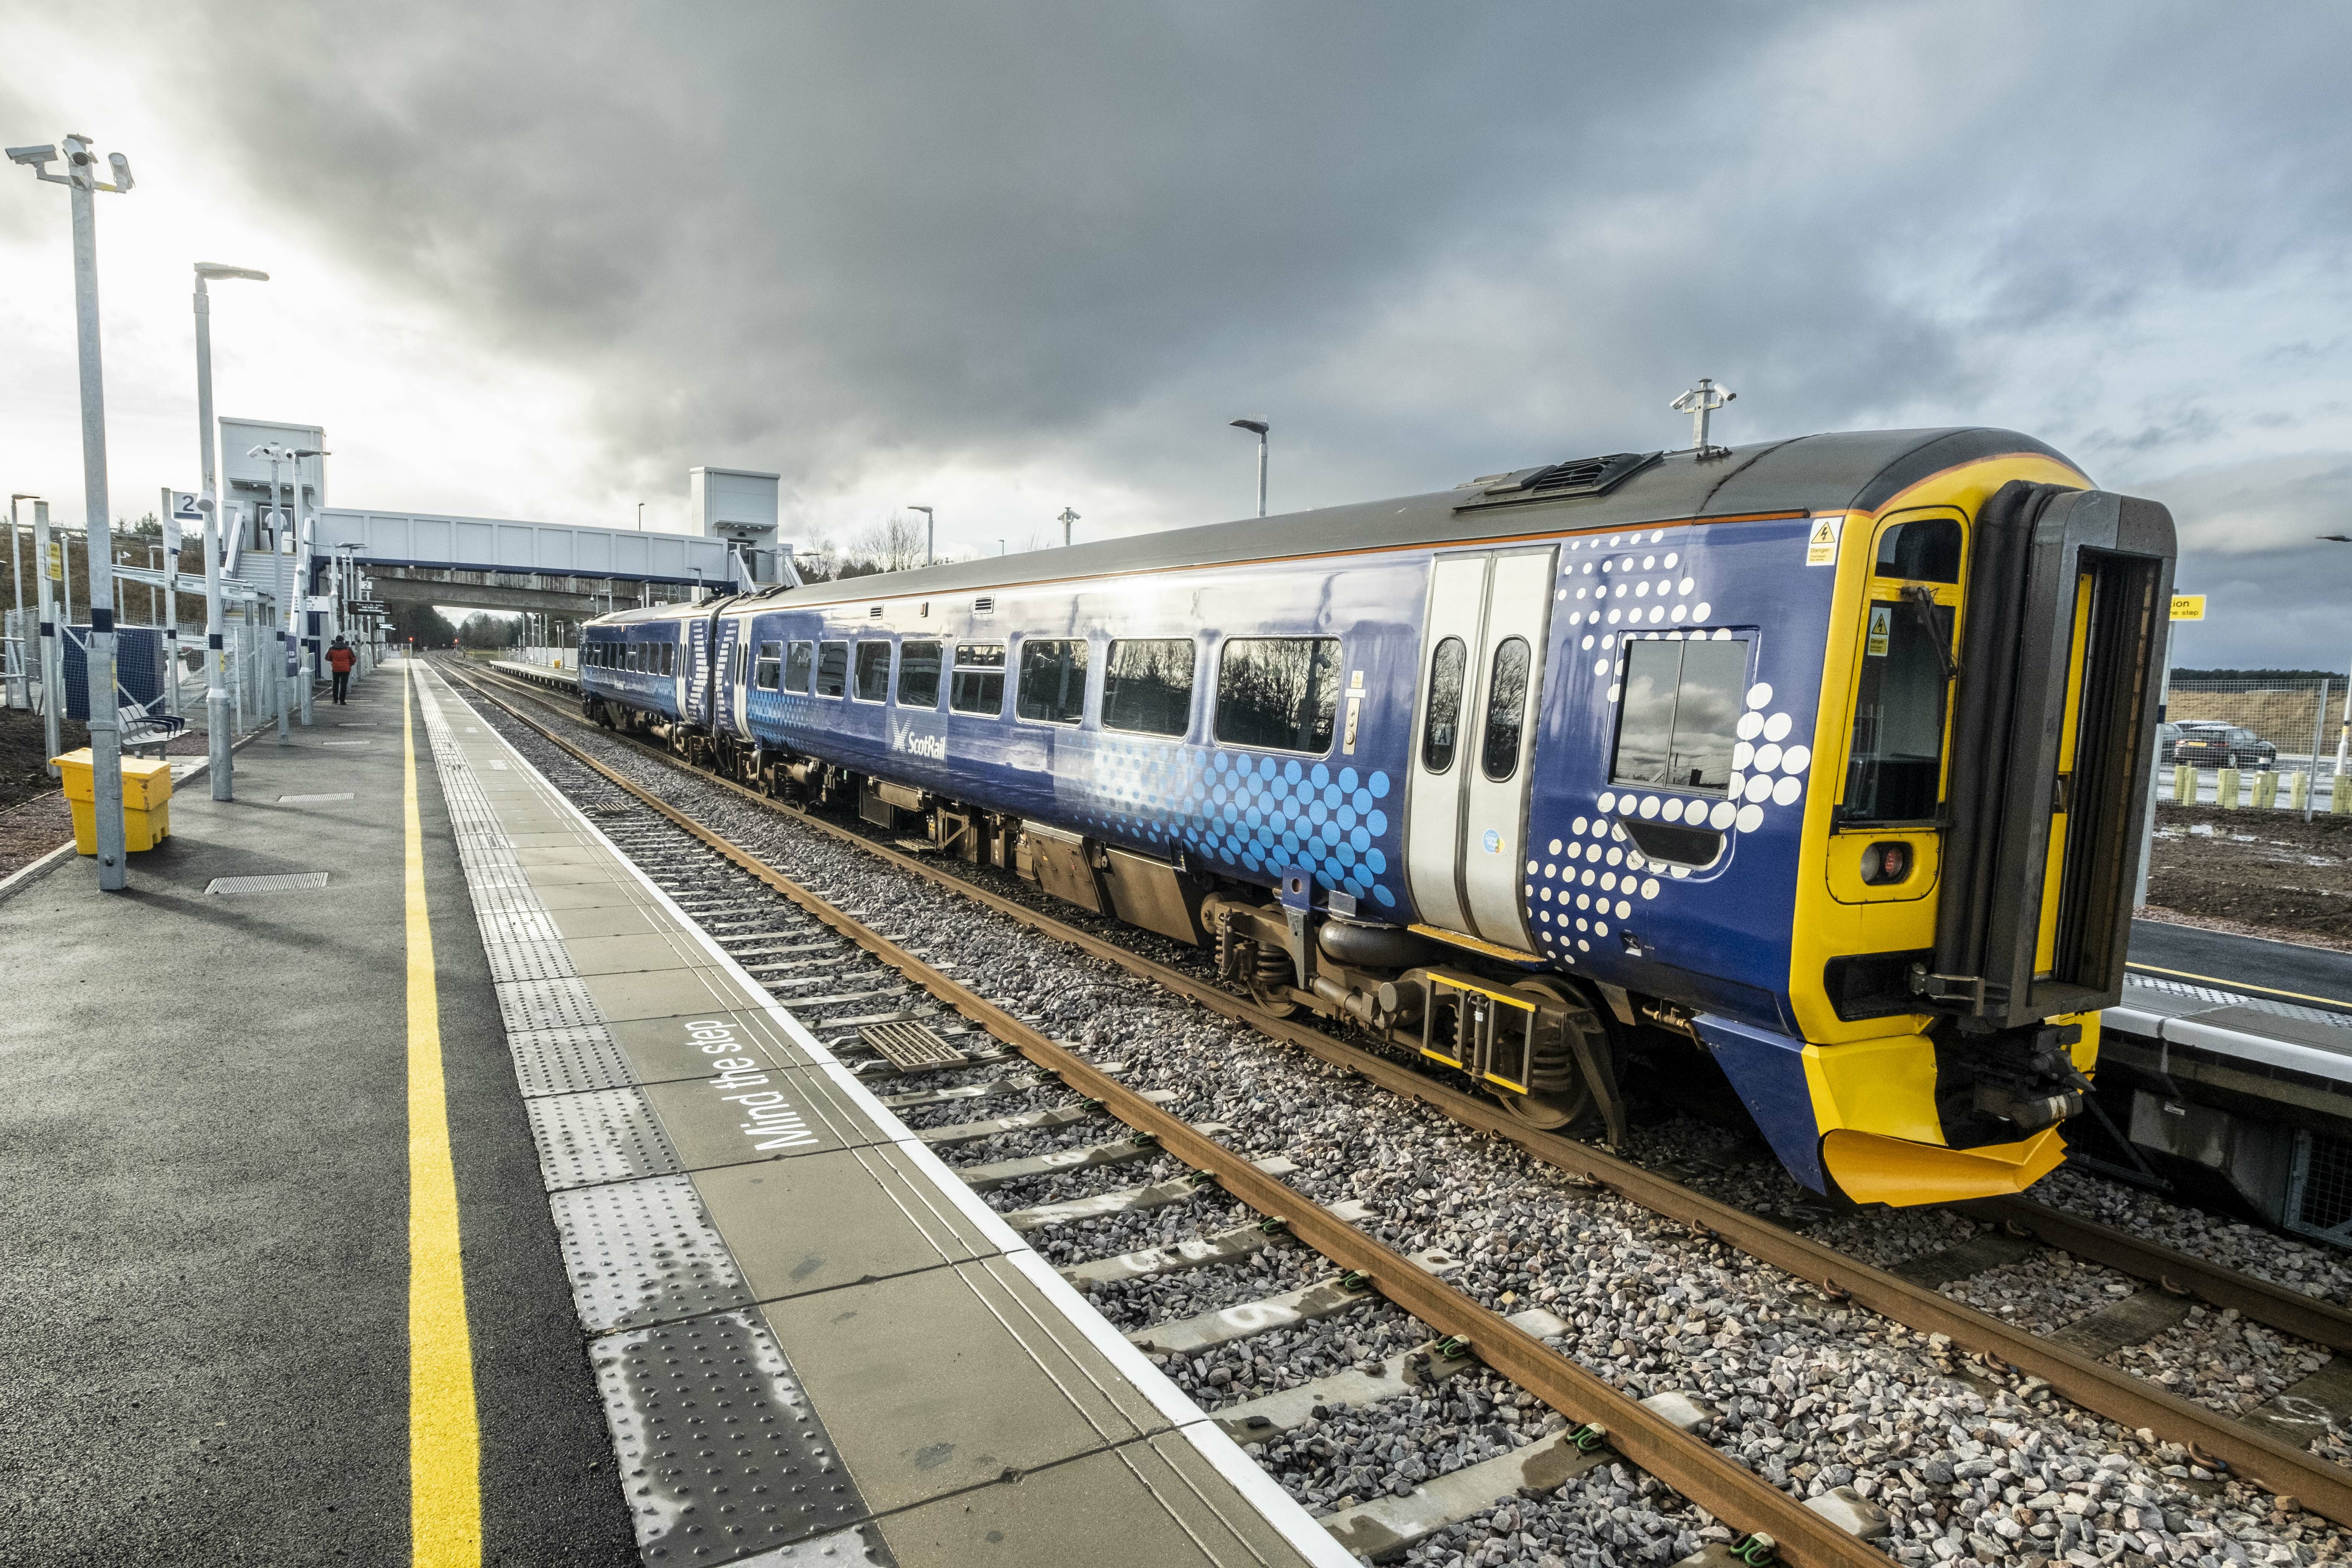 Passenger services are calling at Scotland's newest station